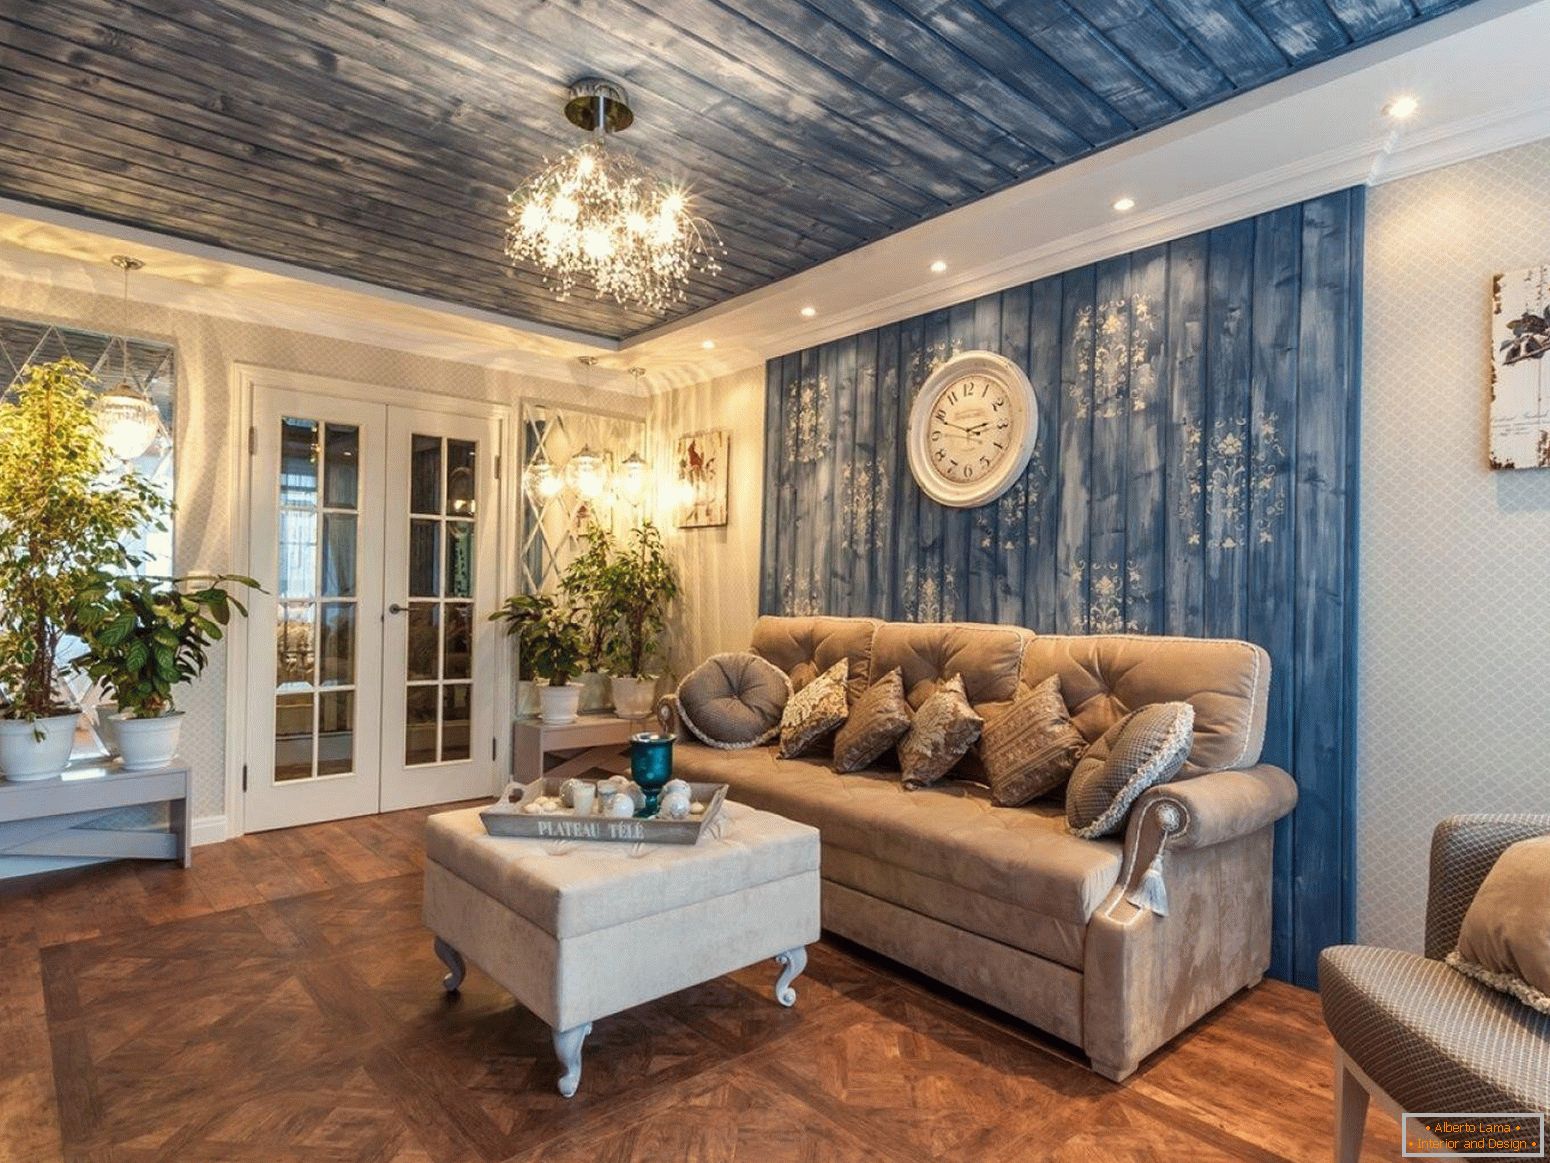 Wall and ceiling decoration in the living room by clapboard